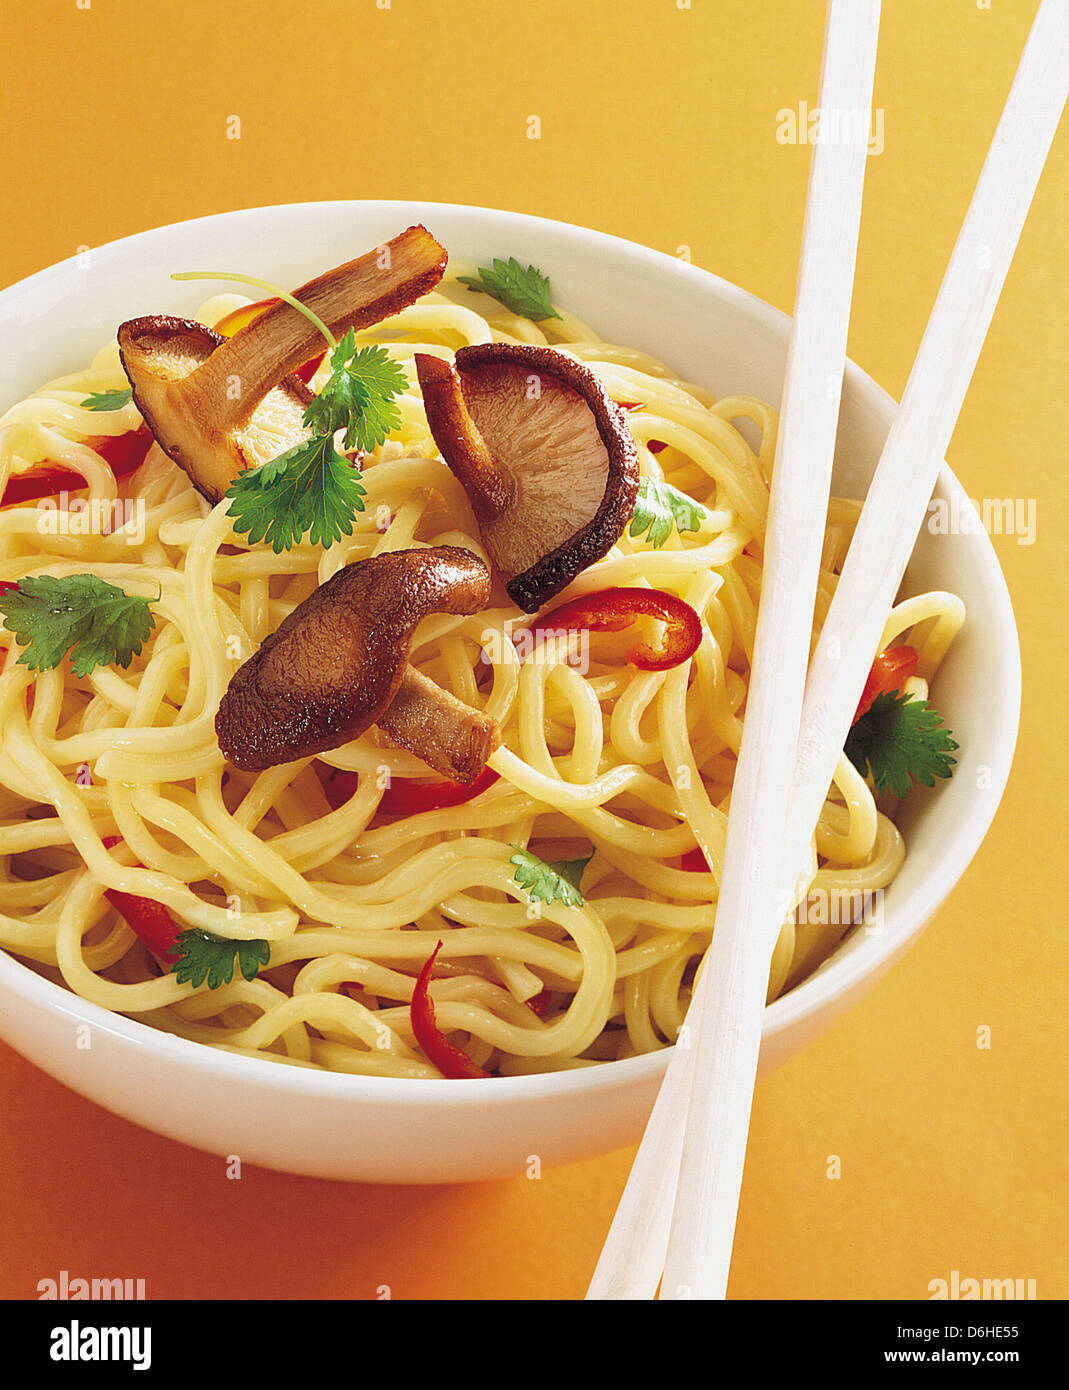 Noodles with mushrooms Stock Photo